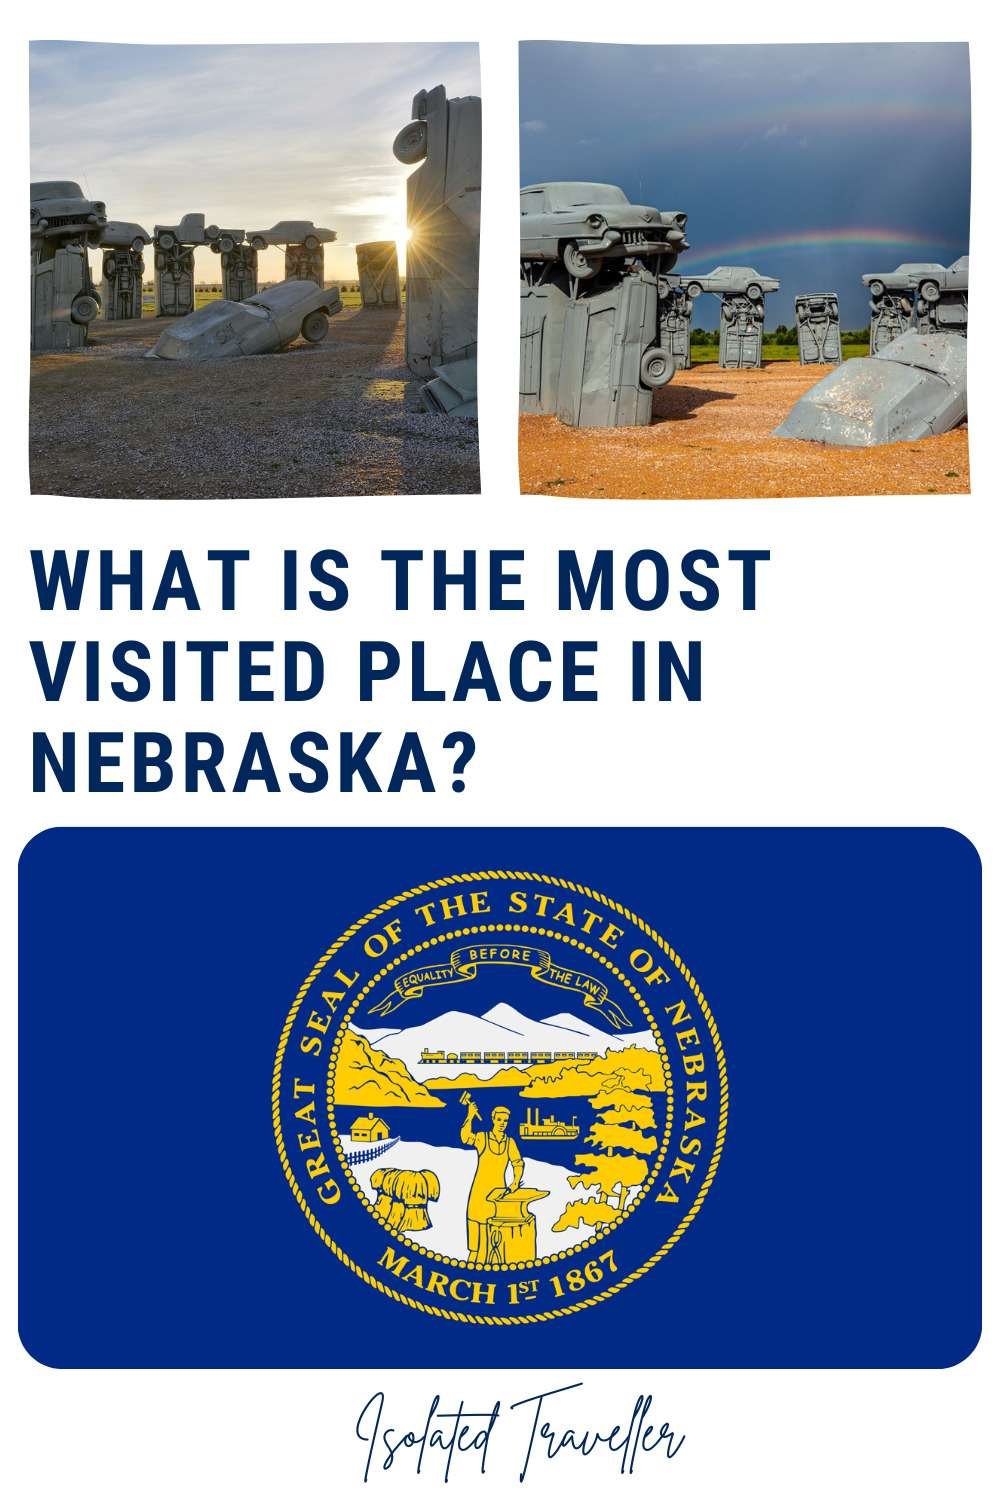 What is the most visited place in Nebraska?